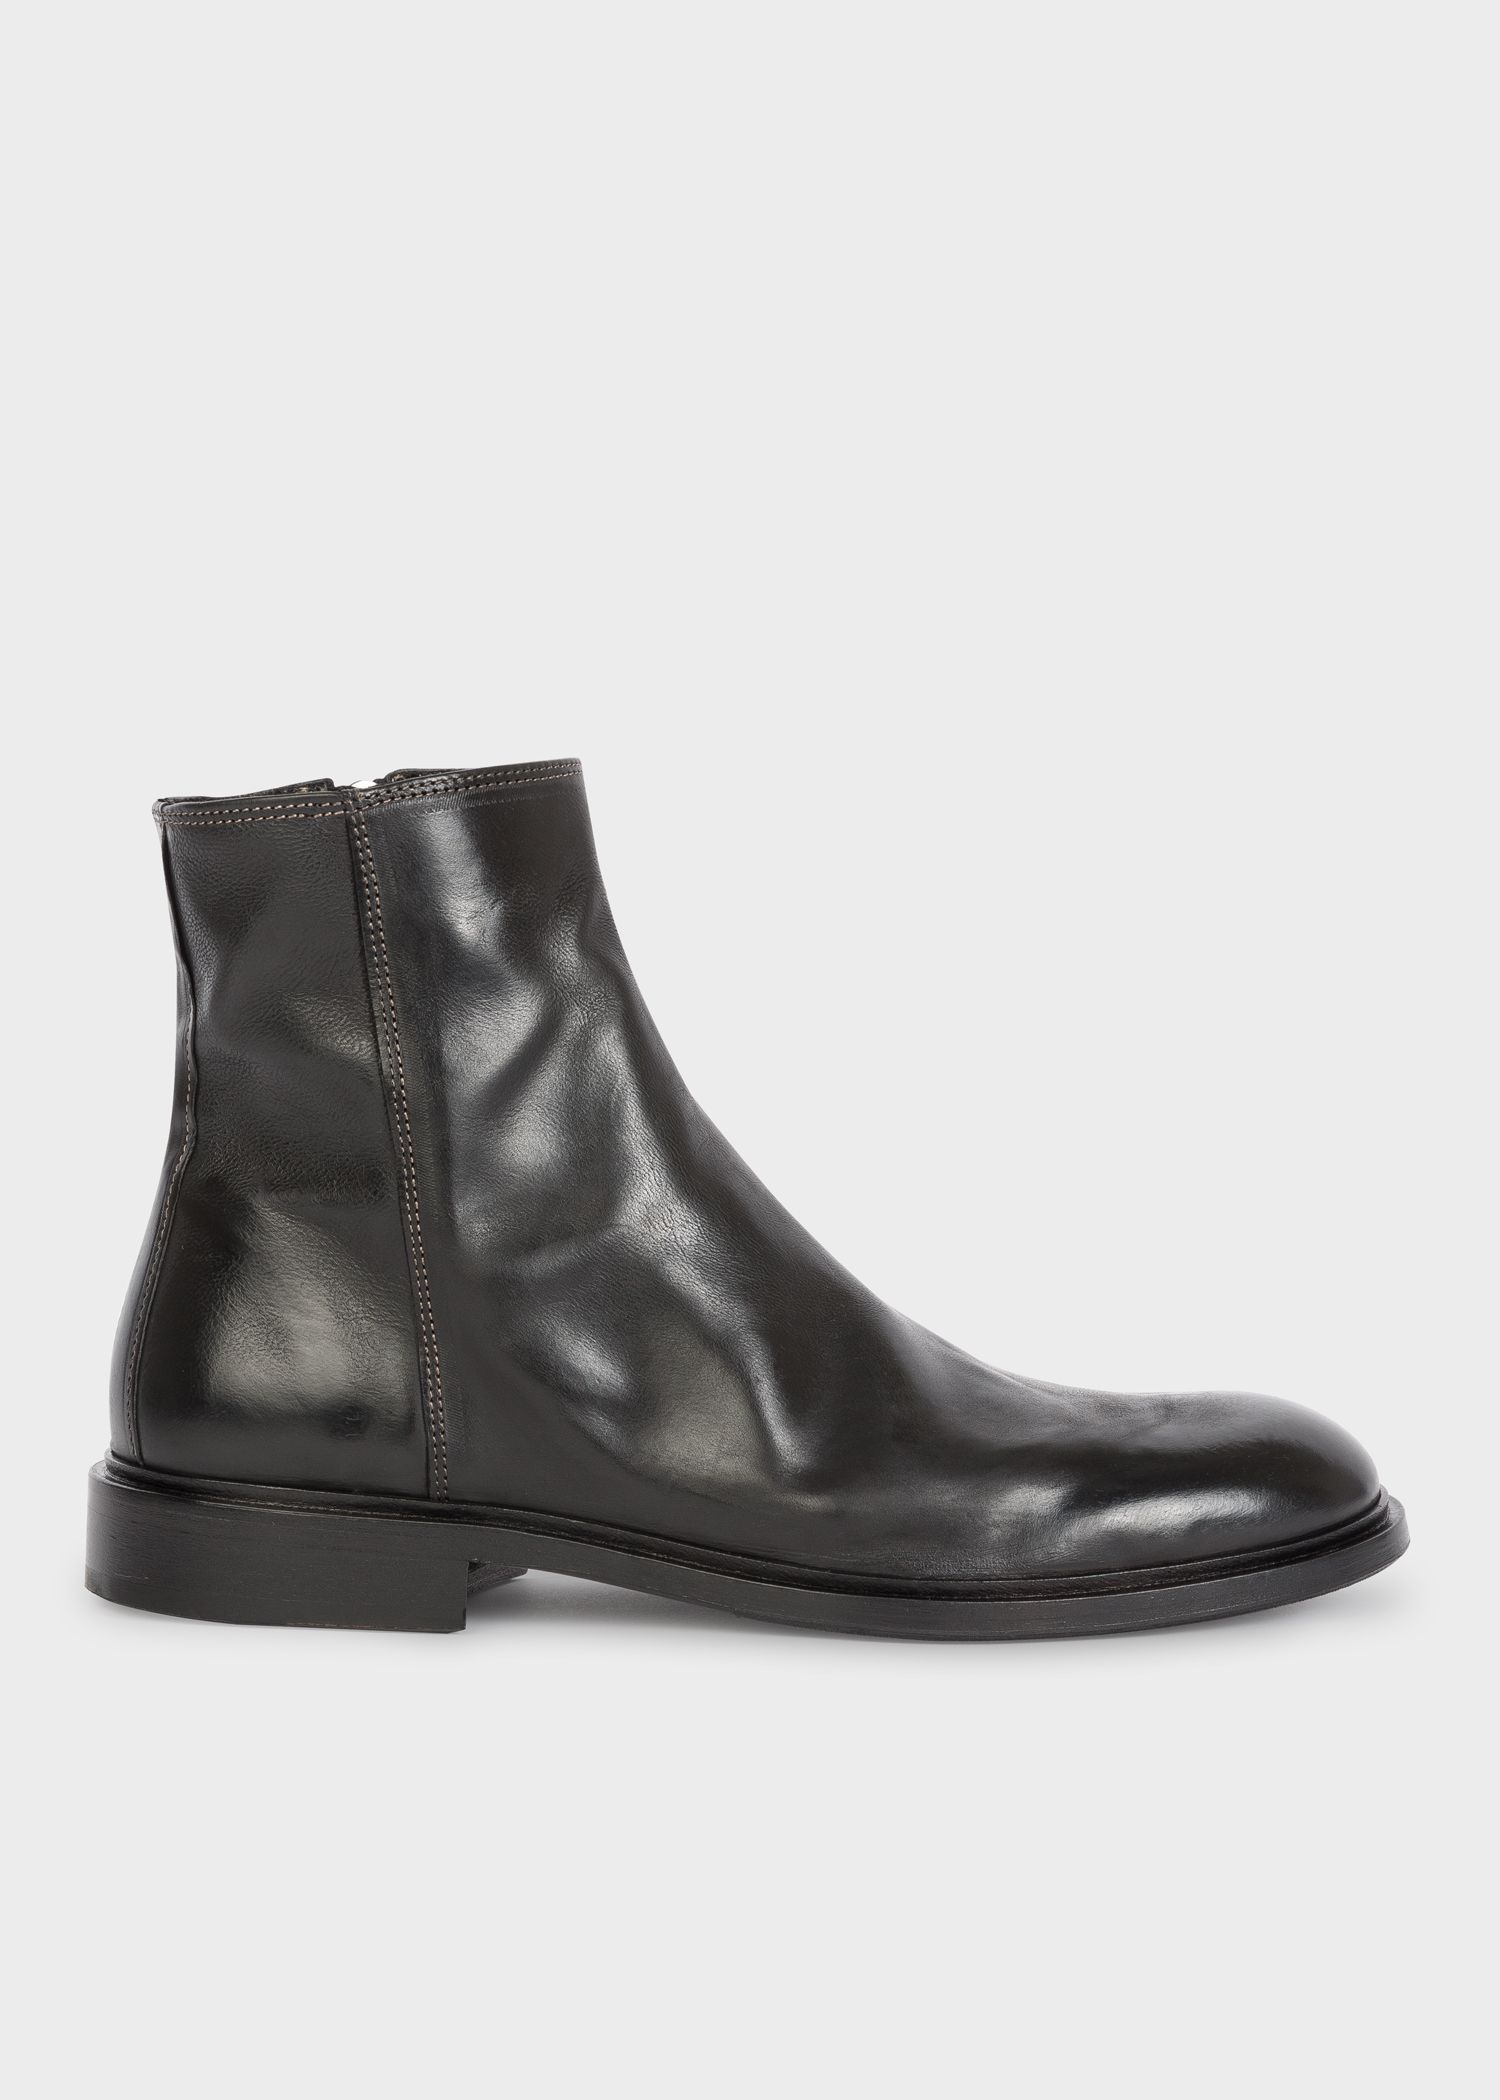 Men's Black Boots in Genuine Leather Made in Portugal